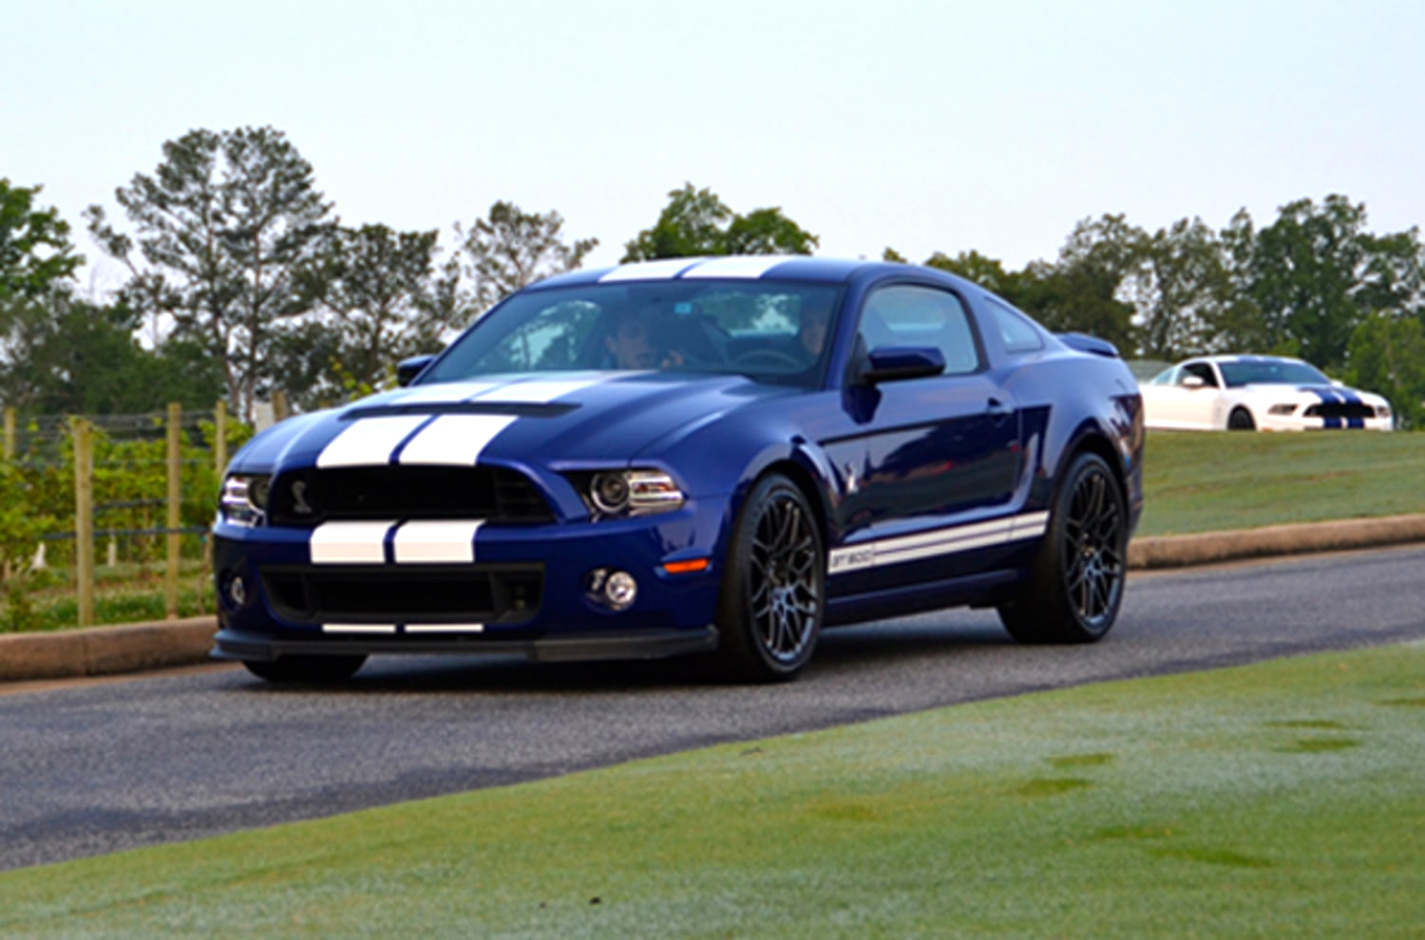 Car Rental software In Shelby Tx Dans ford Shelby Gt500 A 200 Mph Speed Demon